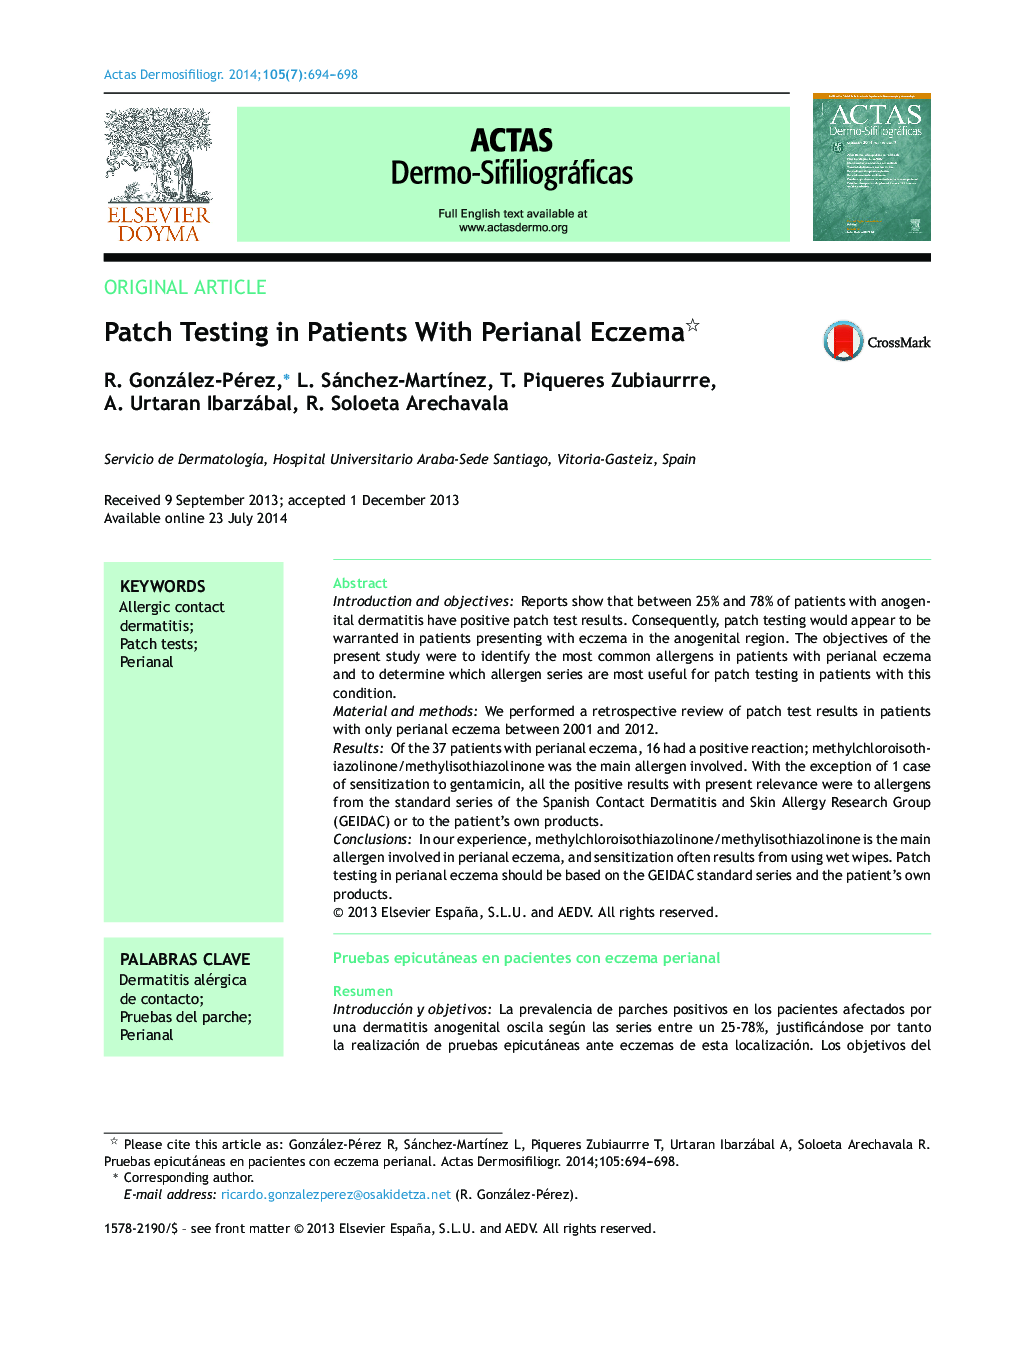 Patch Testing in Patients With Perianal Eczema 